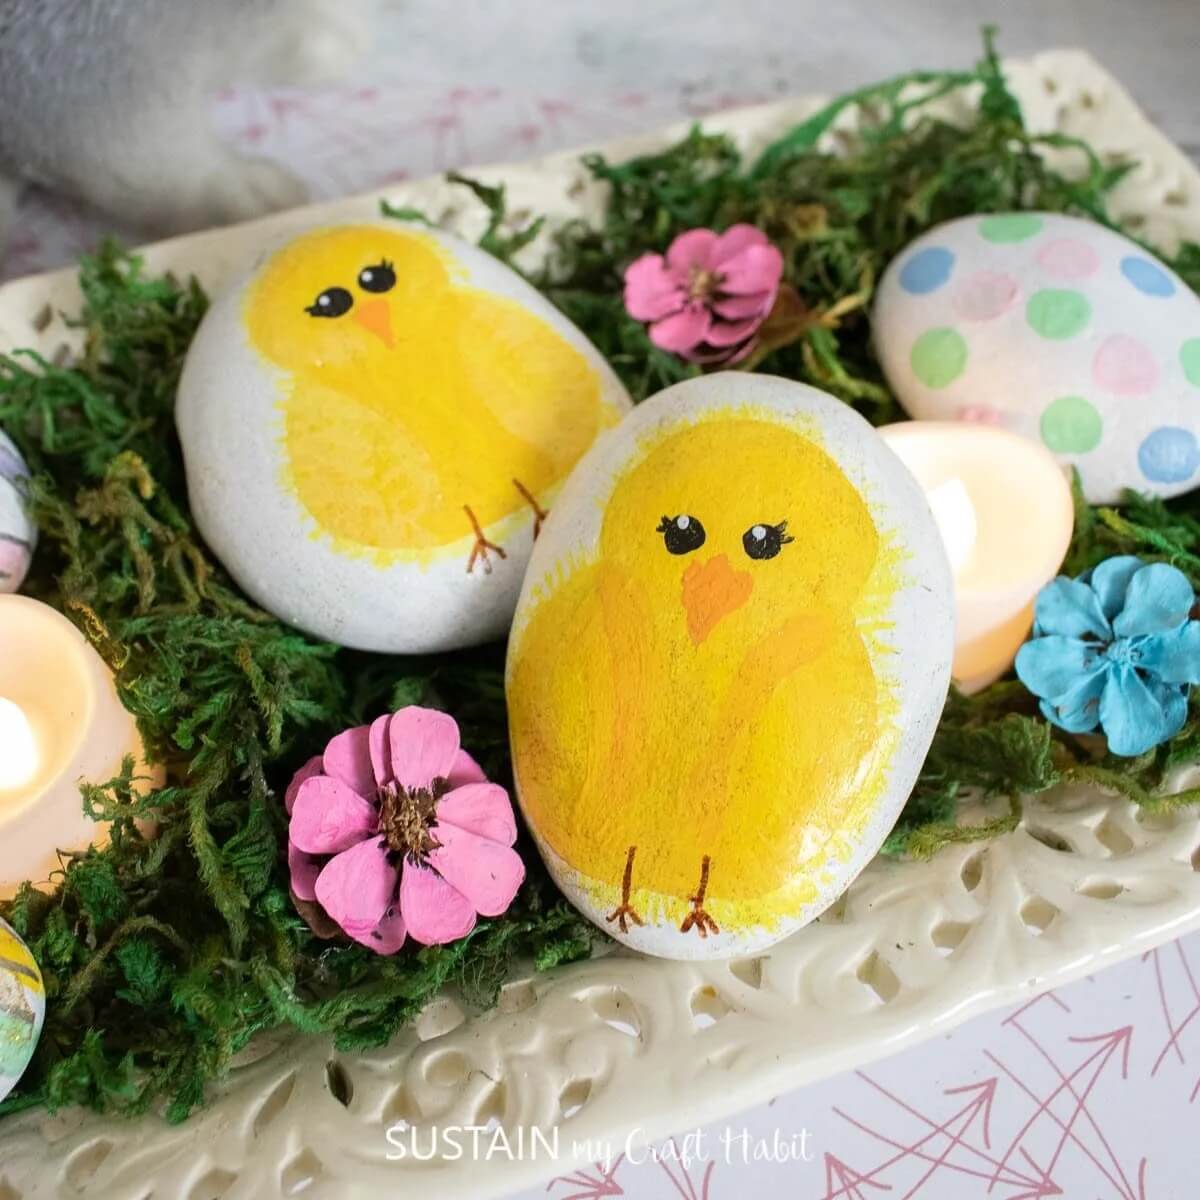 Cute Little Chick Rock Painting DIY For Garden Rock painting ideas for garden